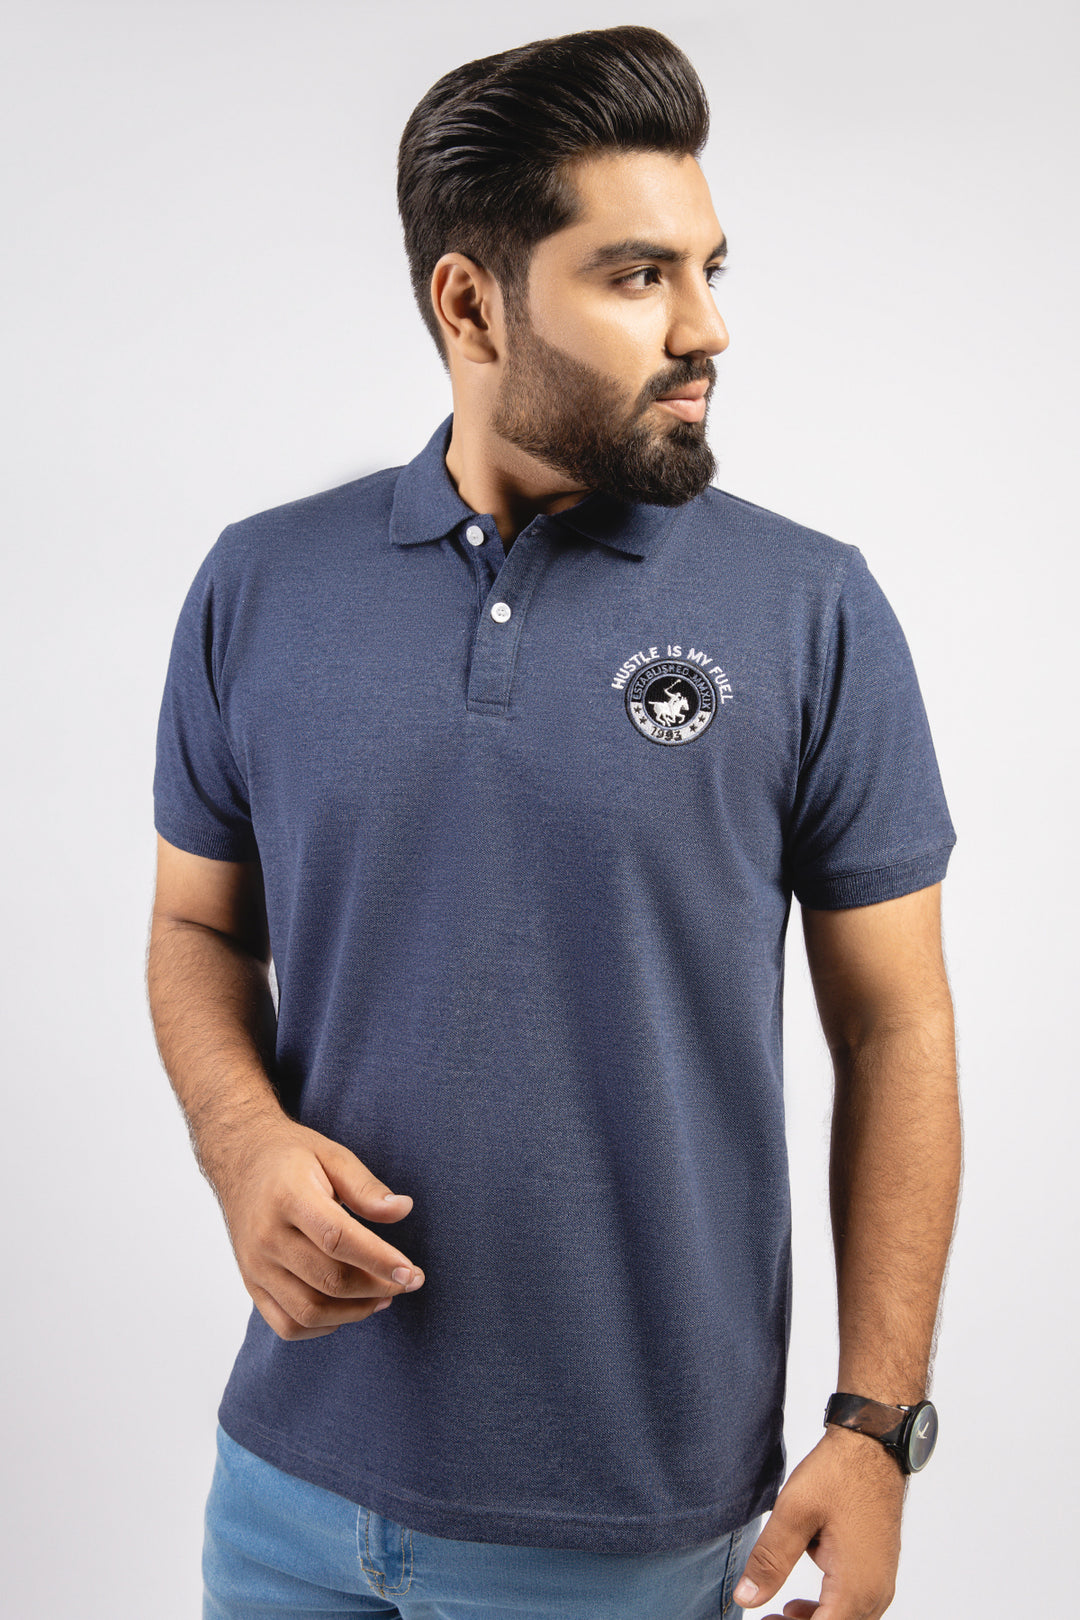 Navy Blue Melange Embroidered Polo Shirt (Plus Size) - S23 - MP0235P